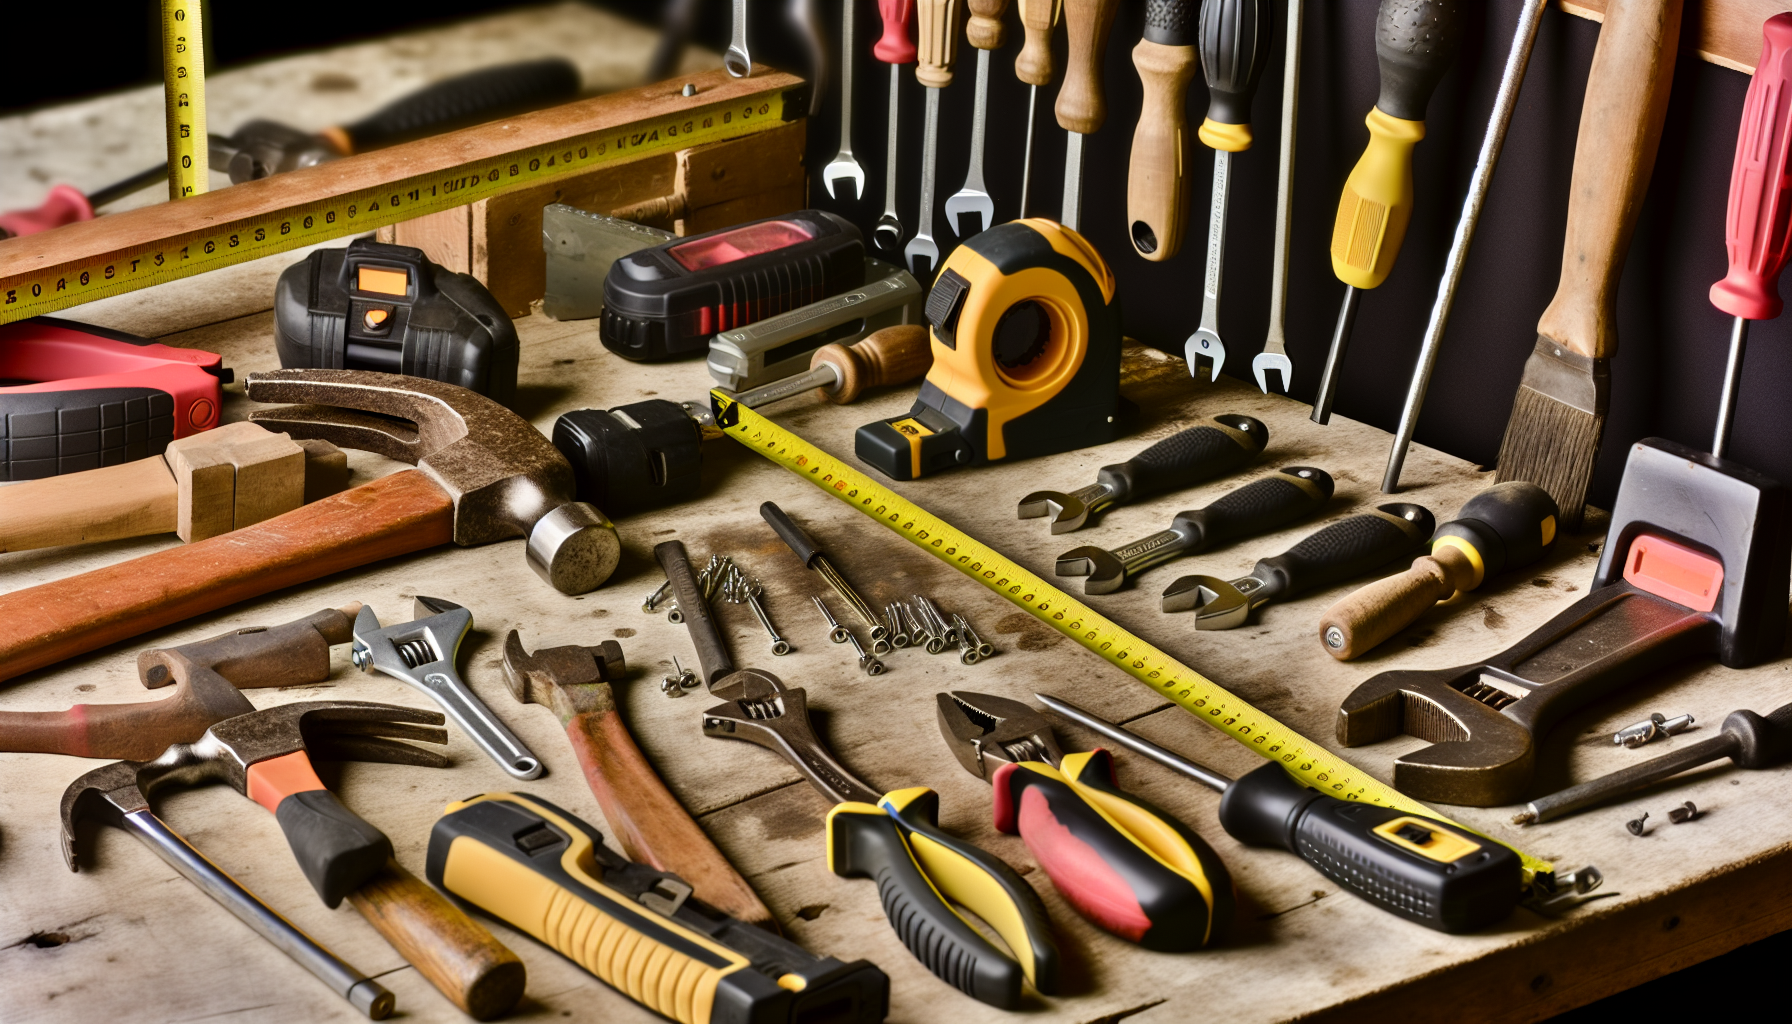 Contractor's tools and equipment